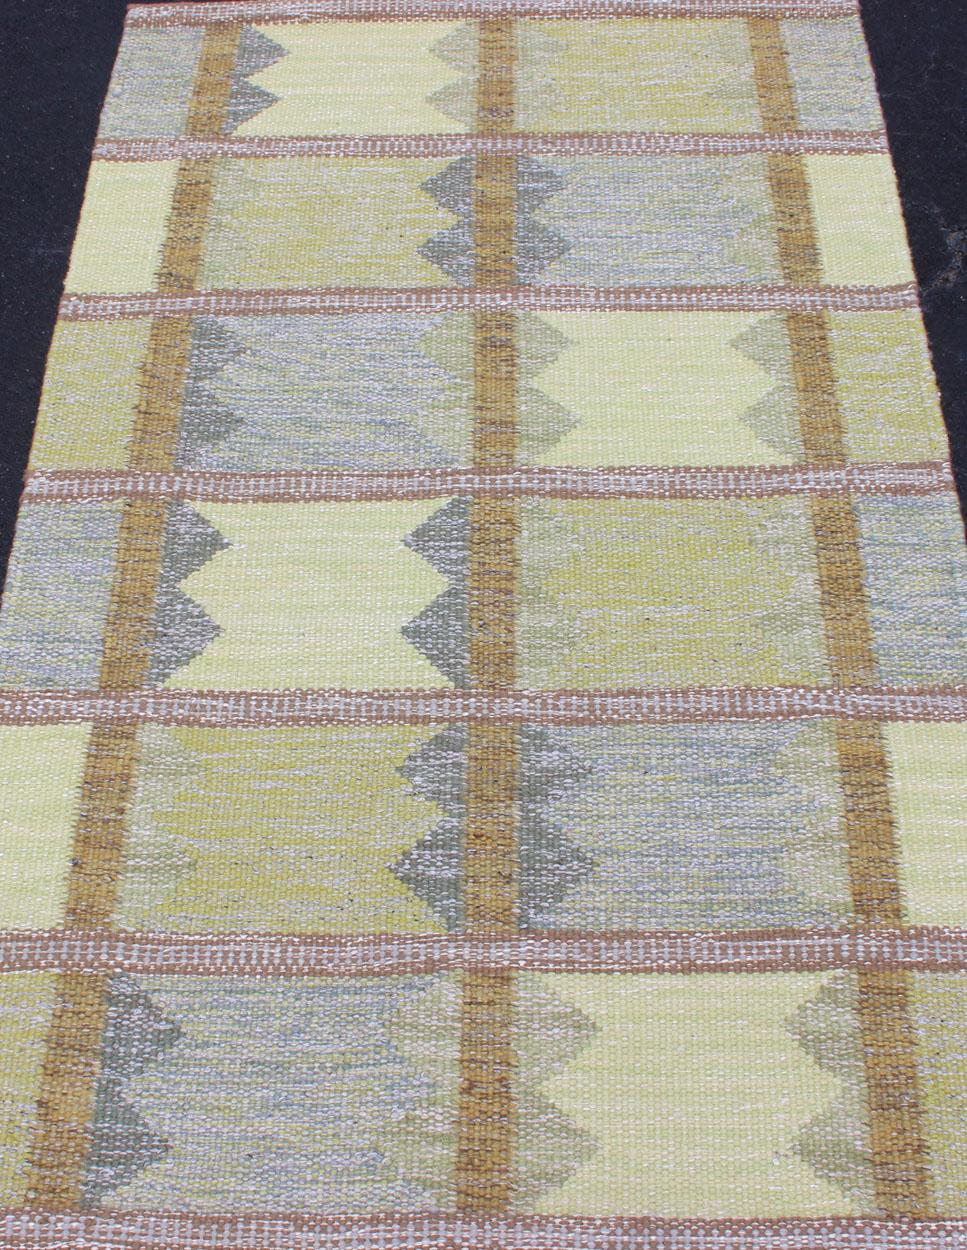 Shades of yellow green, sky blue and gray modern Scandinavian flat-weave rug with Square and stripe design, rug RJK-23275-SHB-038-G, country of origin / type: India / Scandinavian flat-weave.

This Scandinavian flat-weave is inspired by the work